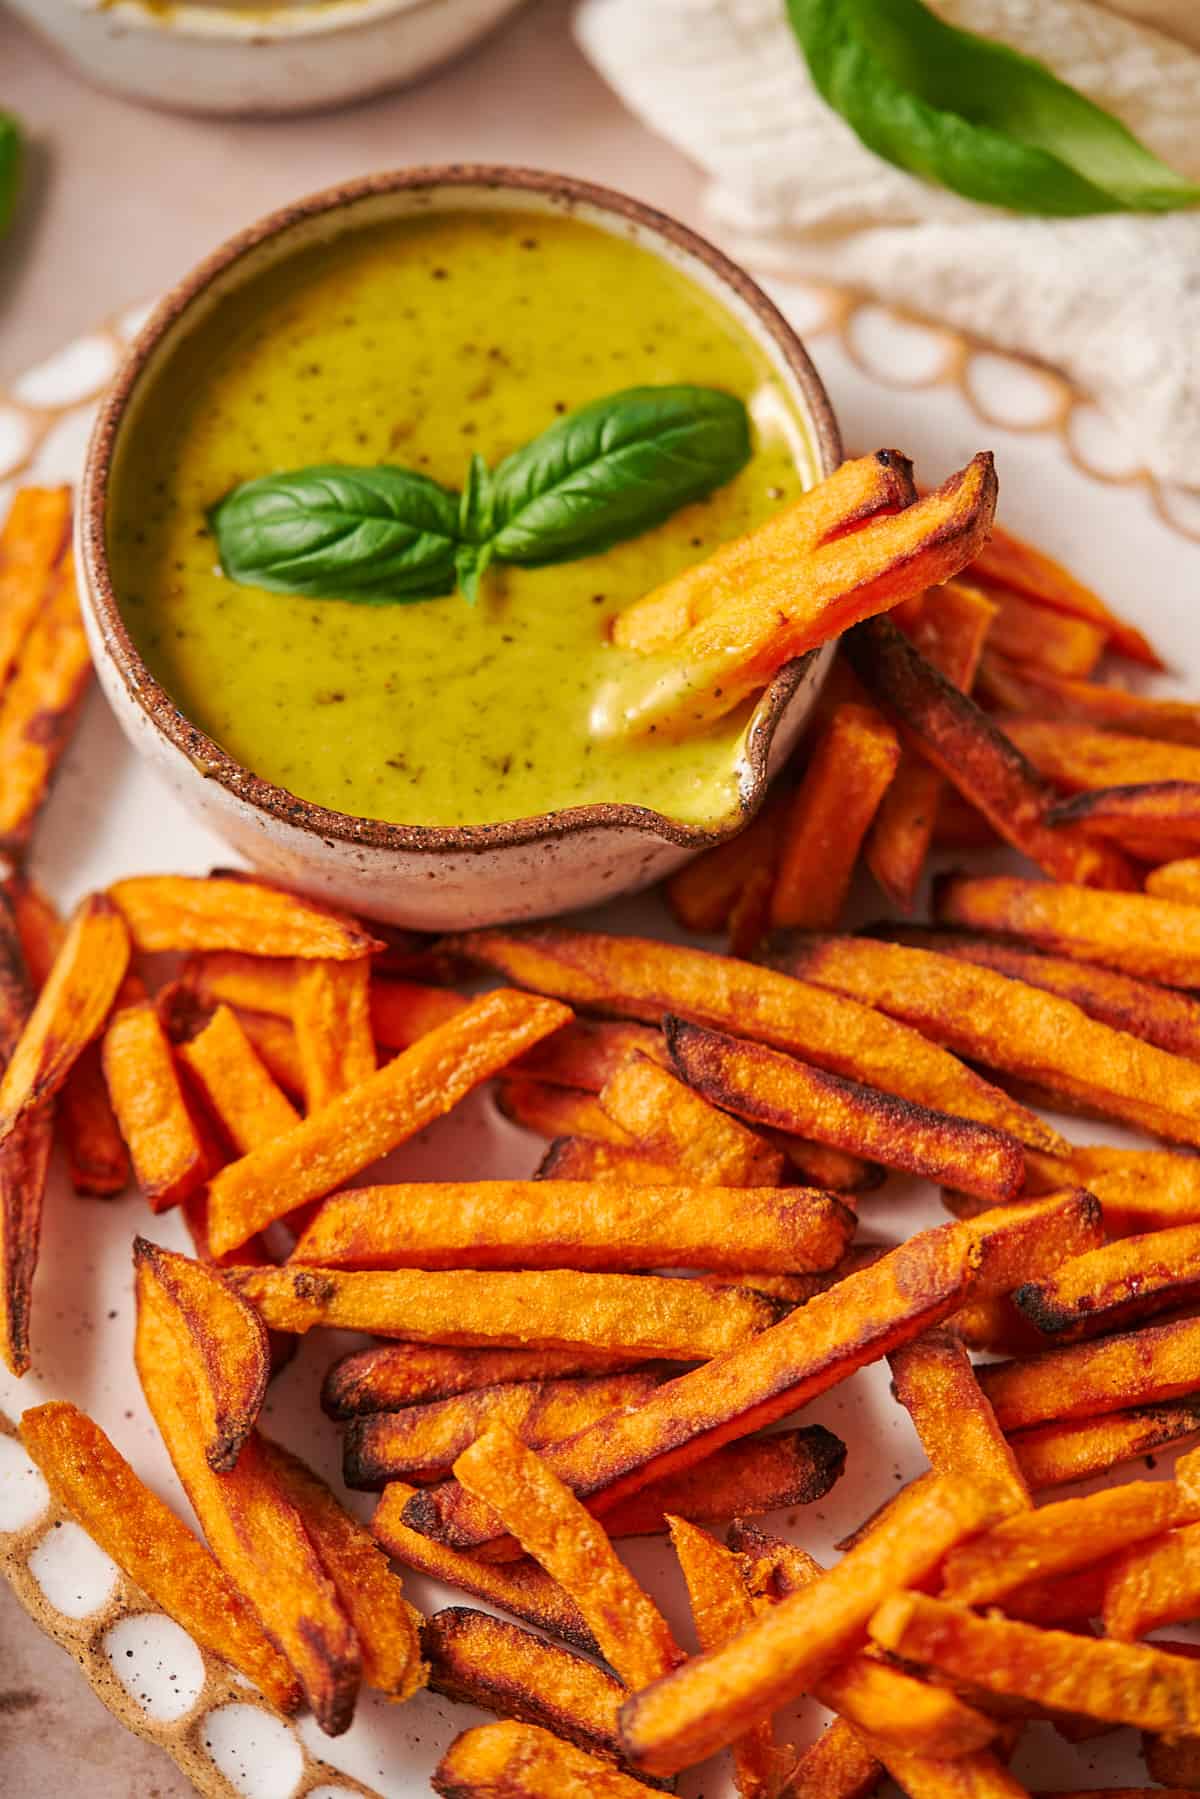 Pesto aioli in a ceramic pouring dish with sweet potato fries on a ruffled plate.